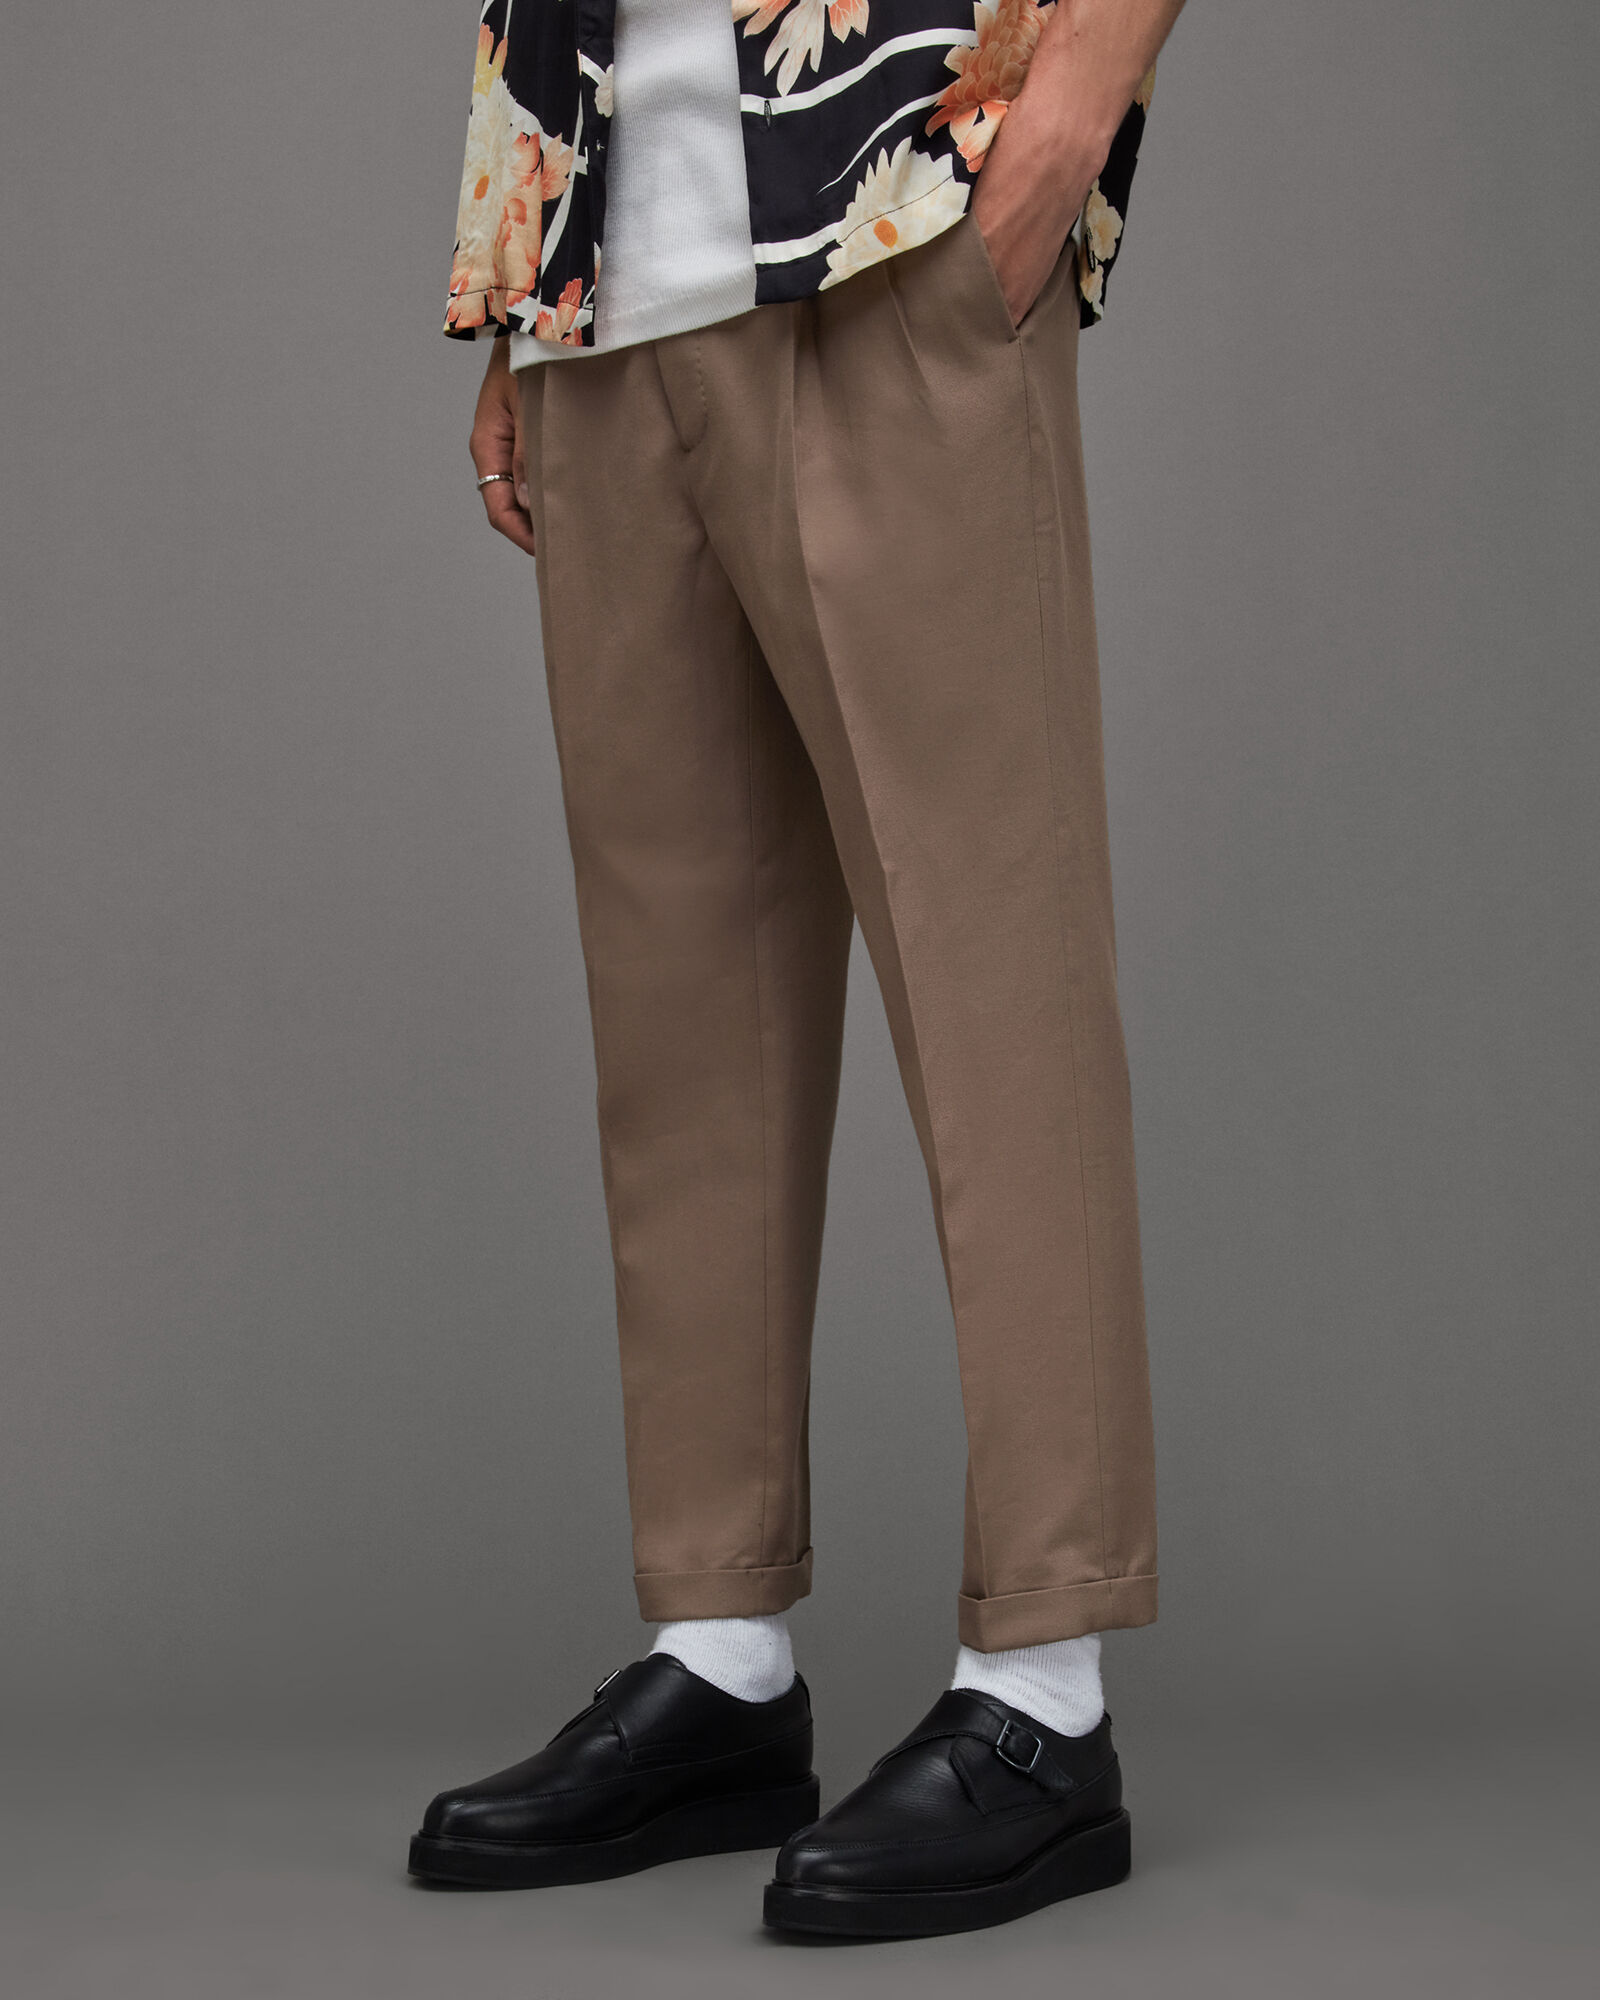 Tapered FIt Men Casual Cotton Trousers